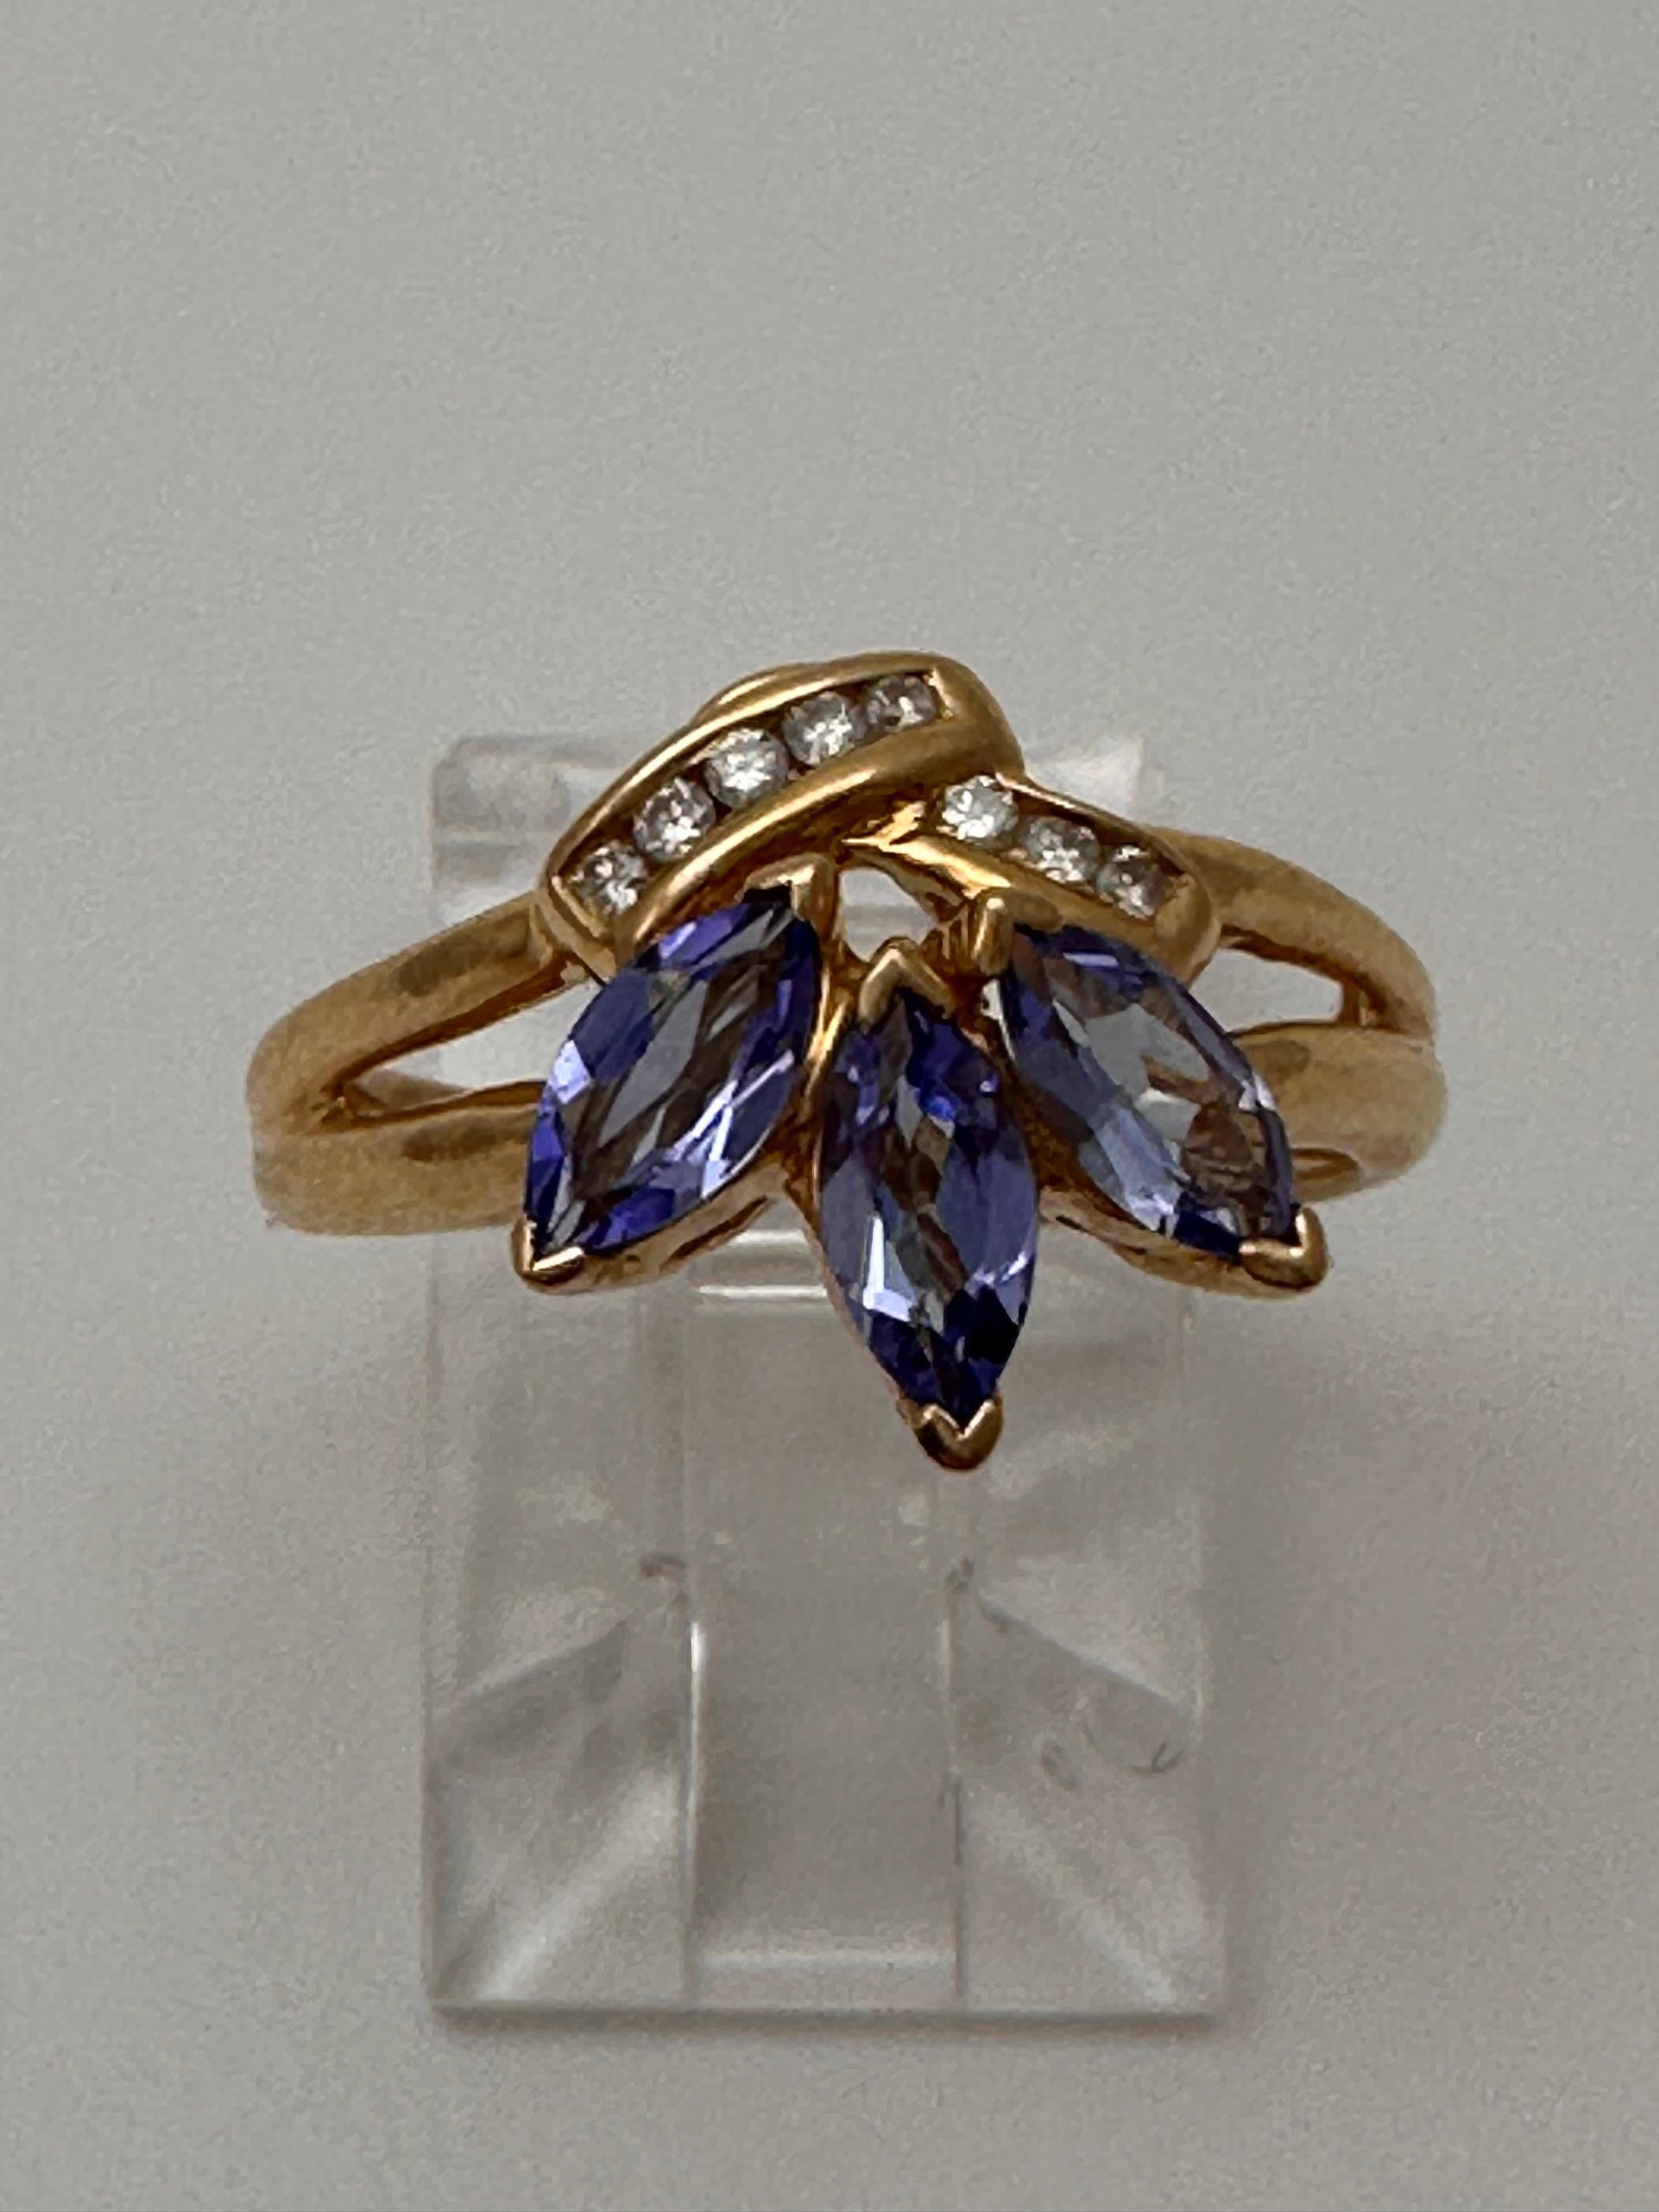 14k Yellow Gold approx. 6mm x 8mm Pear Tanzanite
8 Diamonds 
Ring Size 5 3/4

Tanzanite 

Tanzanite changes colors when it is viewed from different directions. This shifting of colors has been said to facilitate raising consciousness. It aids in